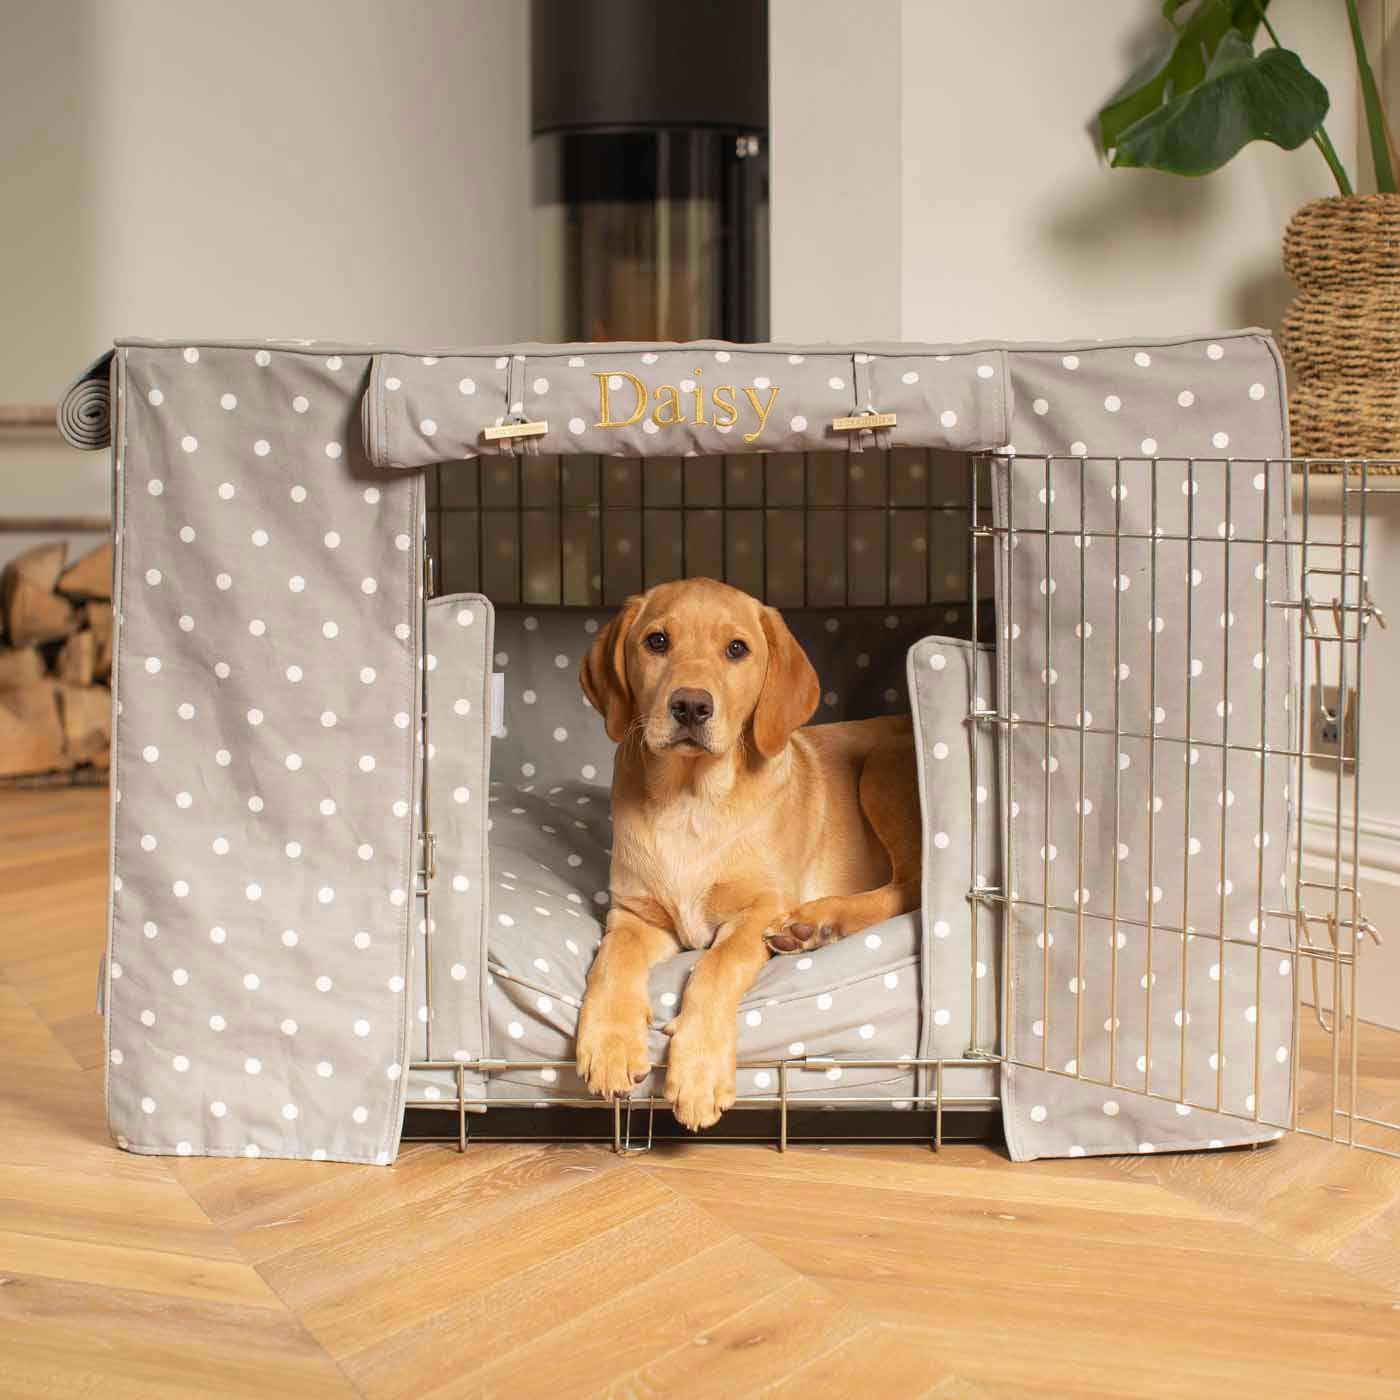 Luxury Heavy Duty Dog Crate, In Stunning Grey Spot Crate Set, The Perfect Dog Crate Set For Building The Ultimate Pet Den! Dog Crate Cover Available To Personalise at Lords & Labradors